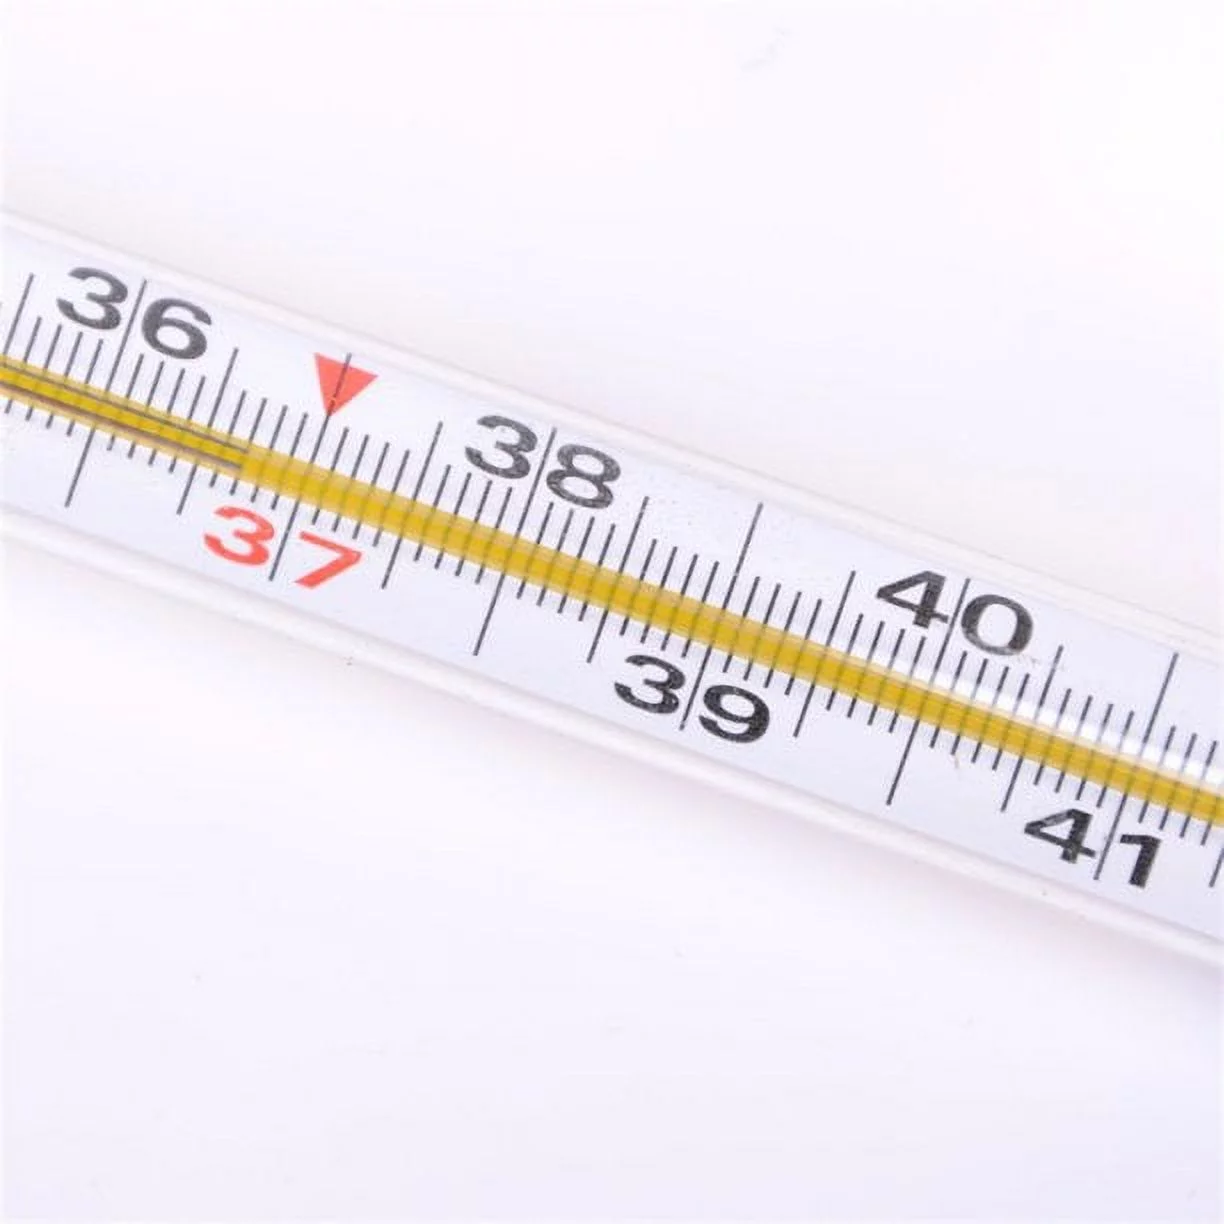 A mercury-free thermometer, a safer alternative to traditional mercury in glass thermometers